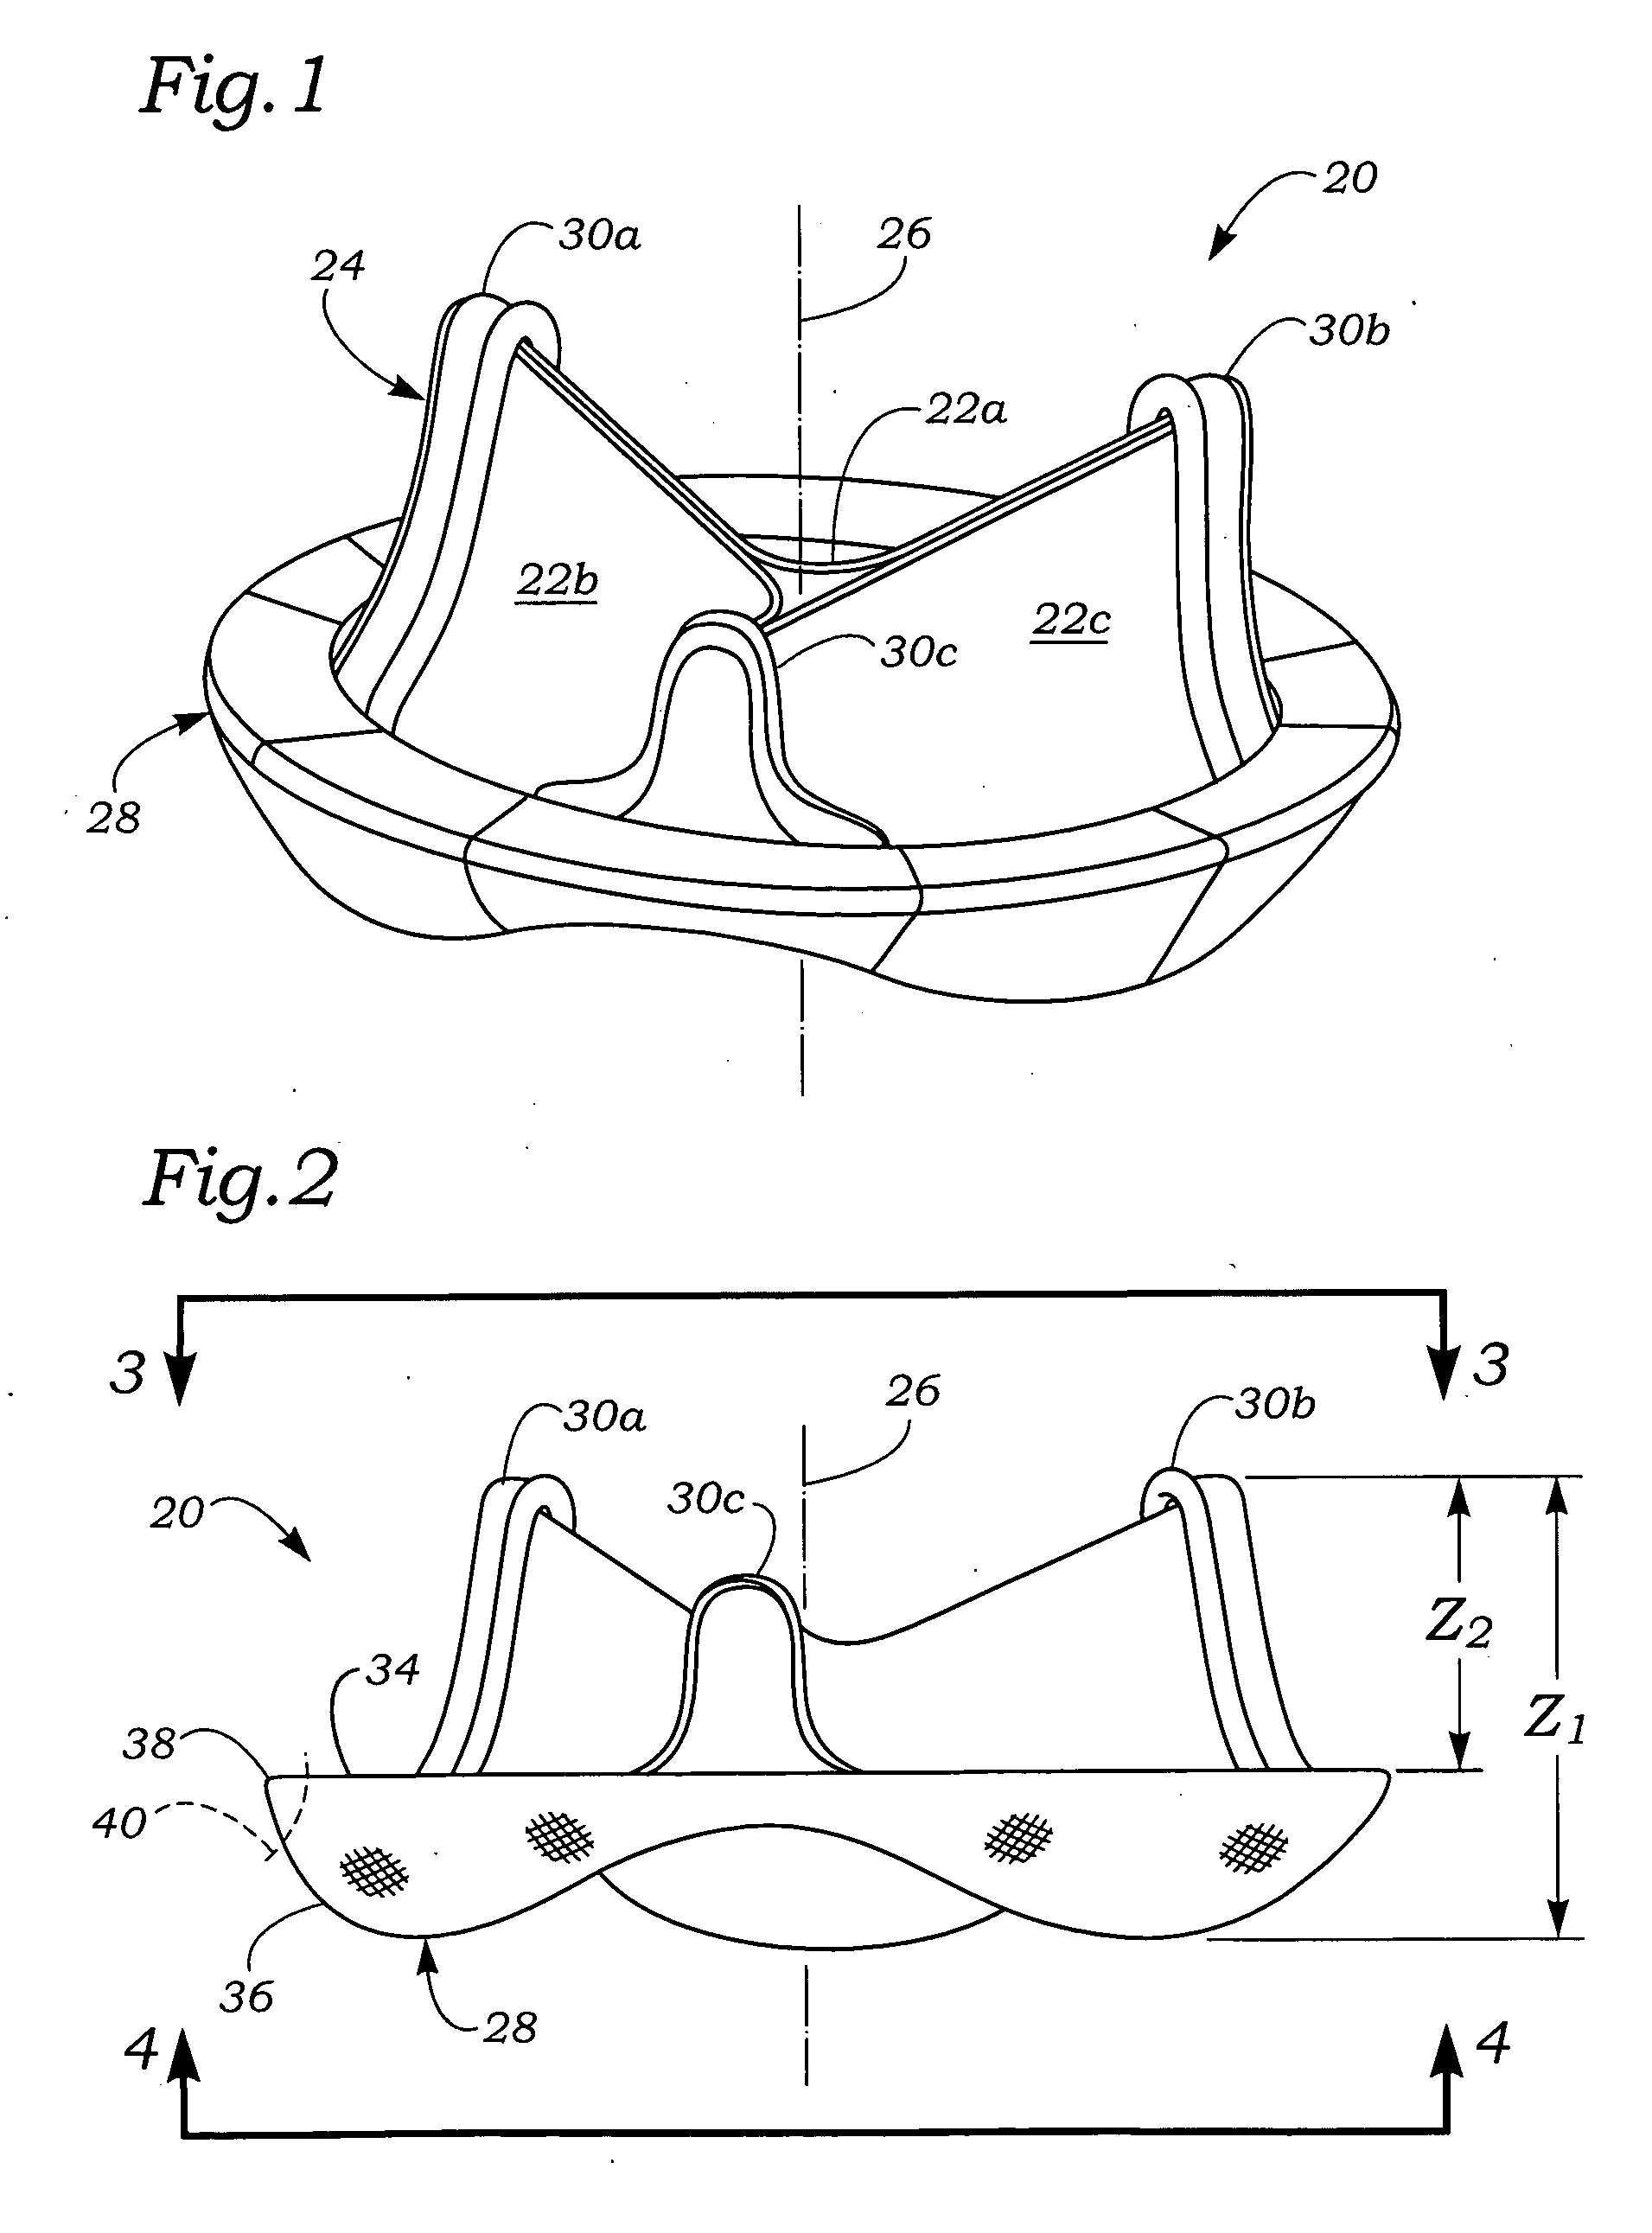 Anatomically approximate prosthetic mitral heart valve